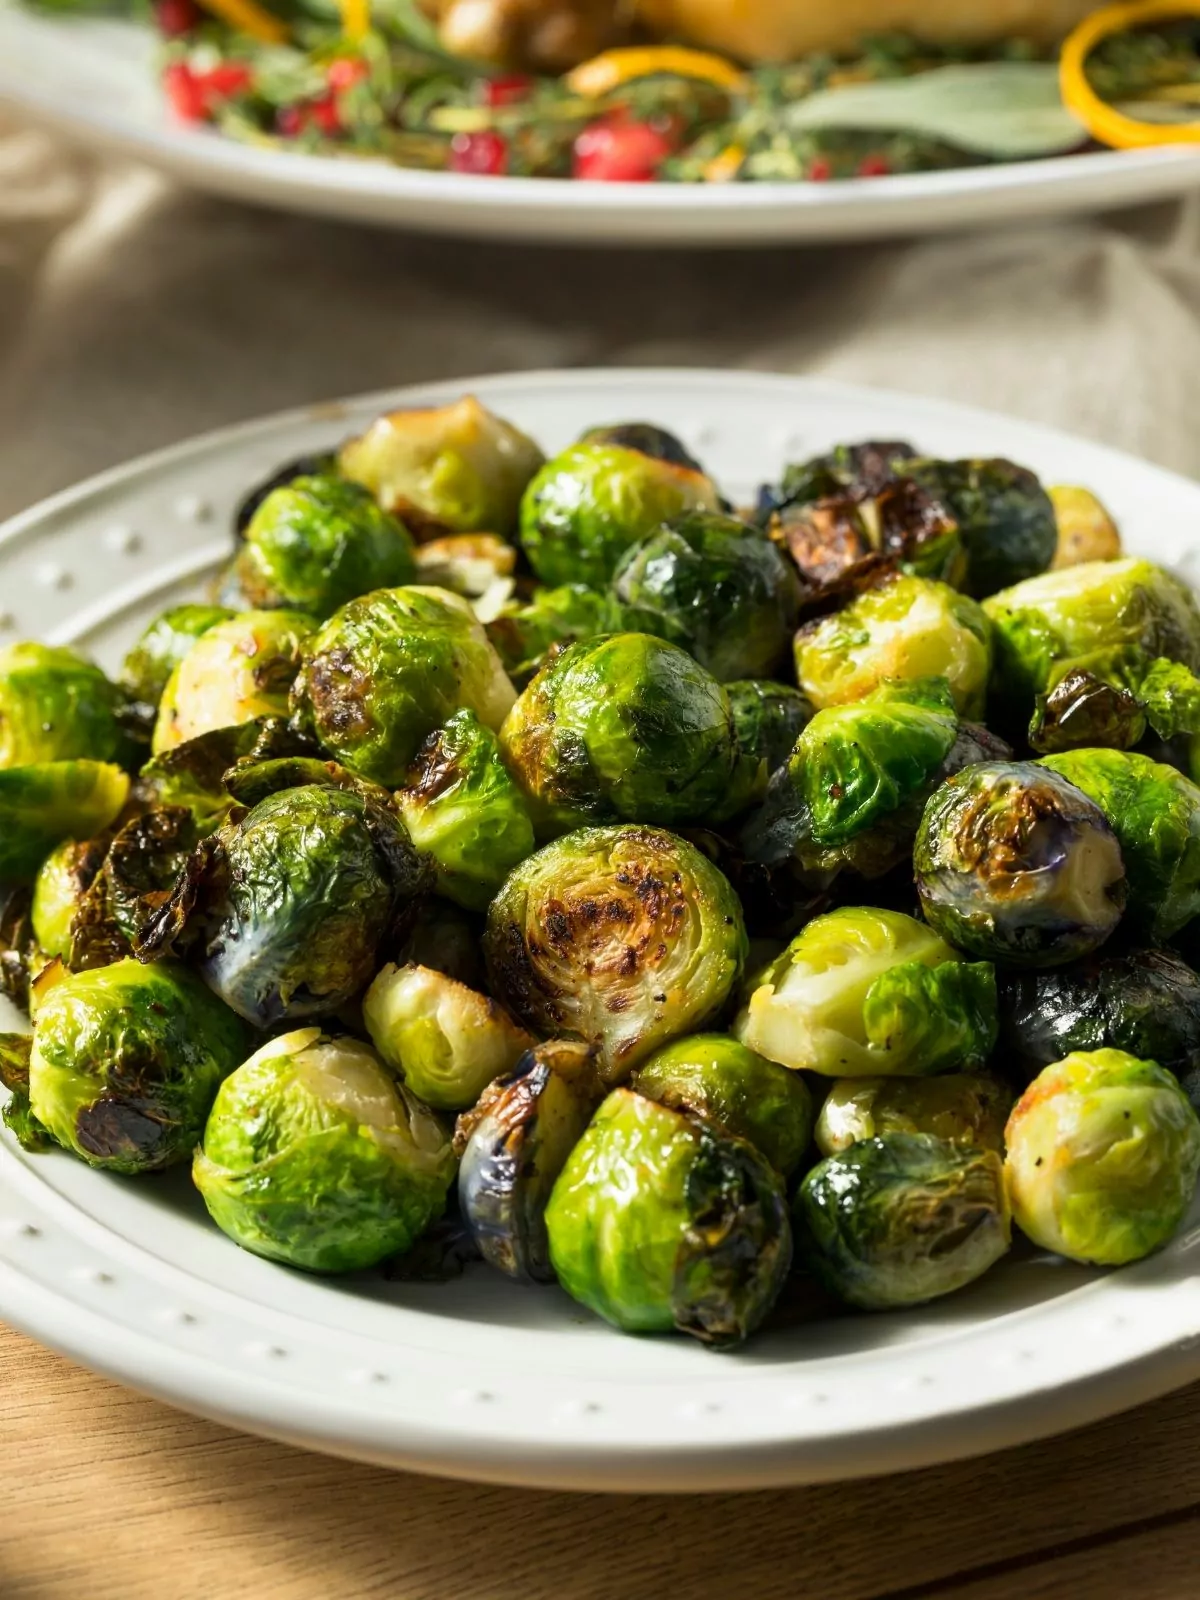 Brussels sprouts roasted and served on white plate.